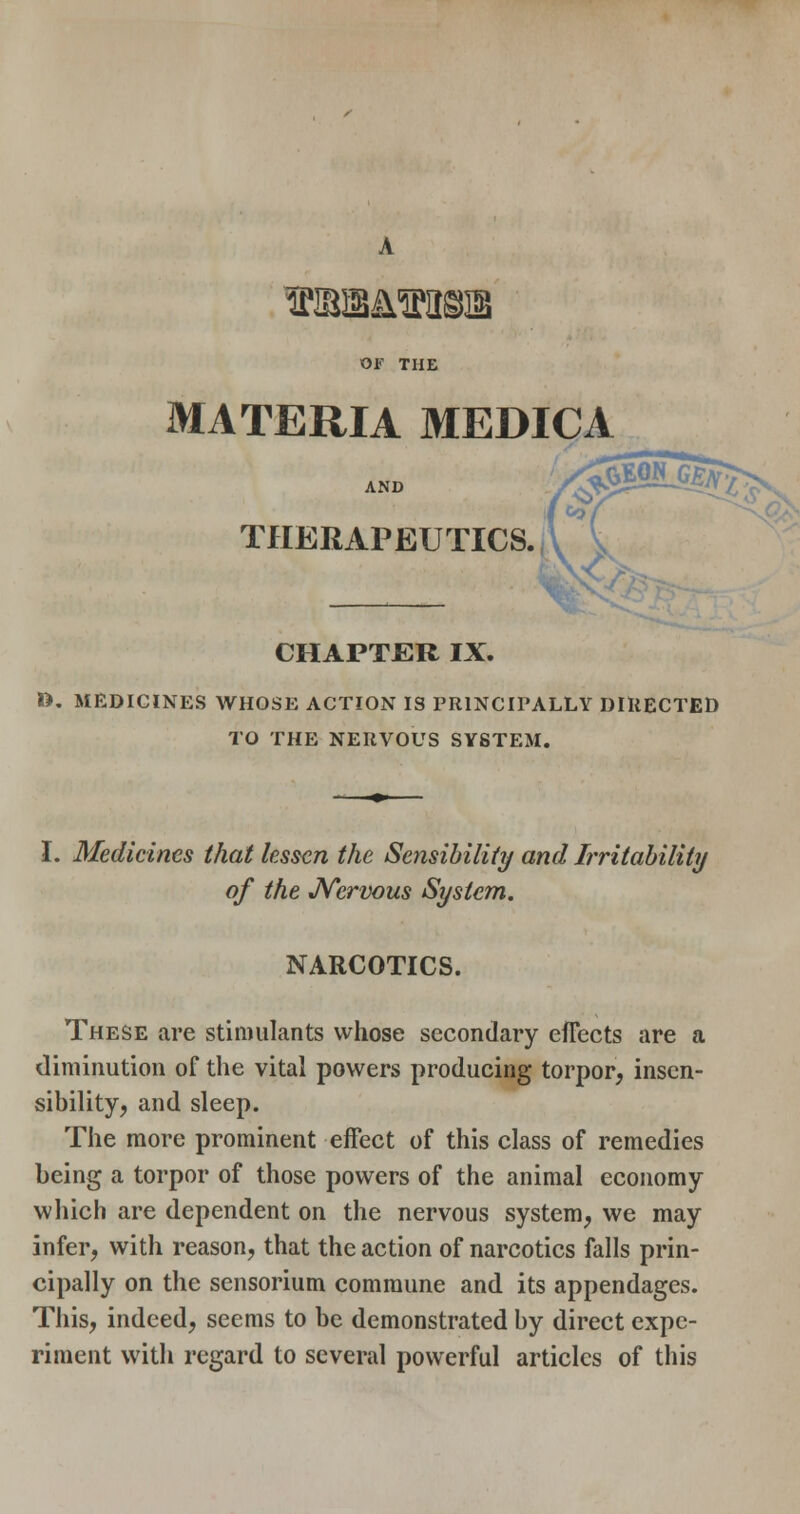 OF THE MATERIA MEDICA AND THERAPEUTICS. CHAPTER IX. n, MEDICINES WHOSE ACTION IS PRINCIPALLY DIUECTED TO THE NERVOUS SYSTEM. I. Medicines that lessen the Sensibility and Irriiahiliiy of the JVervous System. NARCOTICS. These are stimulants whose secondary efTects are a diminution of the vital powers producing torpor, insen- sibility, and sleep. The more prominent effect of this class of remedies being a torpor of those powers of the animal economy which are dependent on the nervous system, we may infer, with reason, that the action of narcotics falls prin- cipally on the sensorium commune and its appendages. This, indeed, seems to be demonstrated by direct expe- riment witli regard to several powerful articles of this